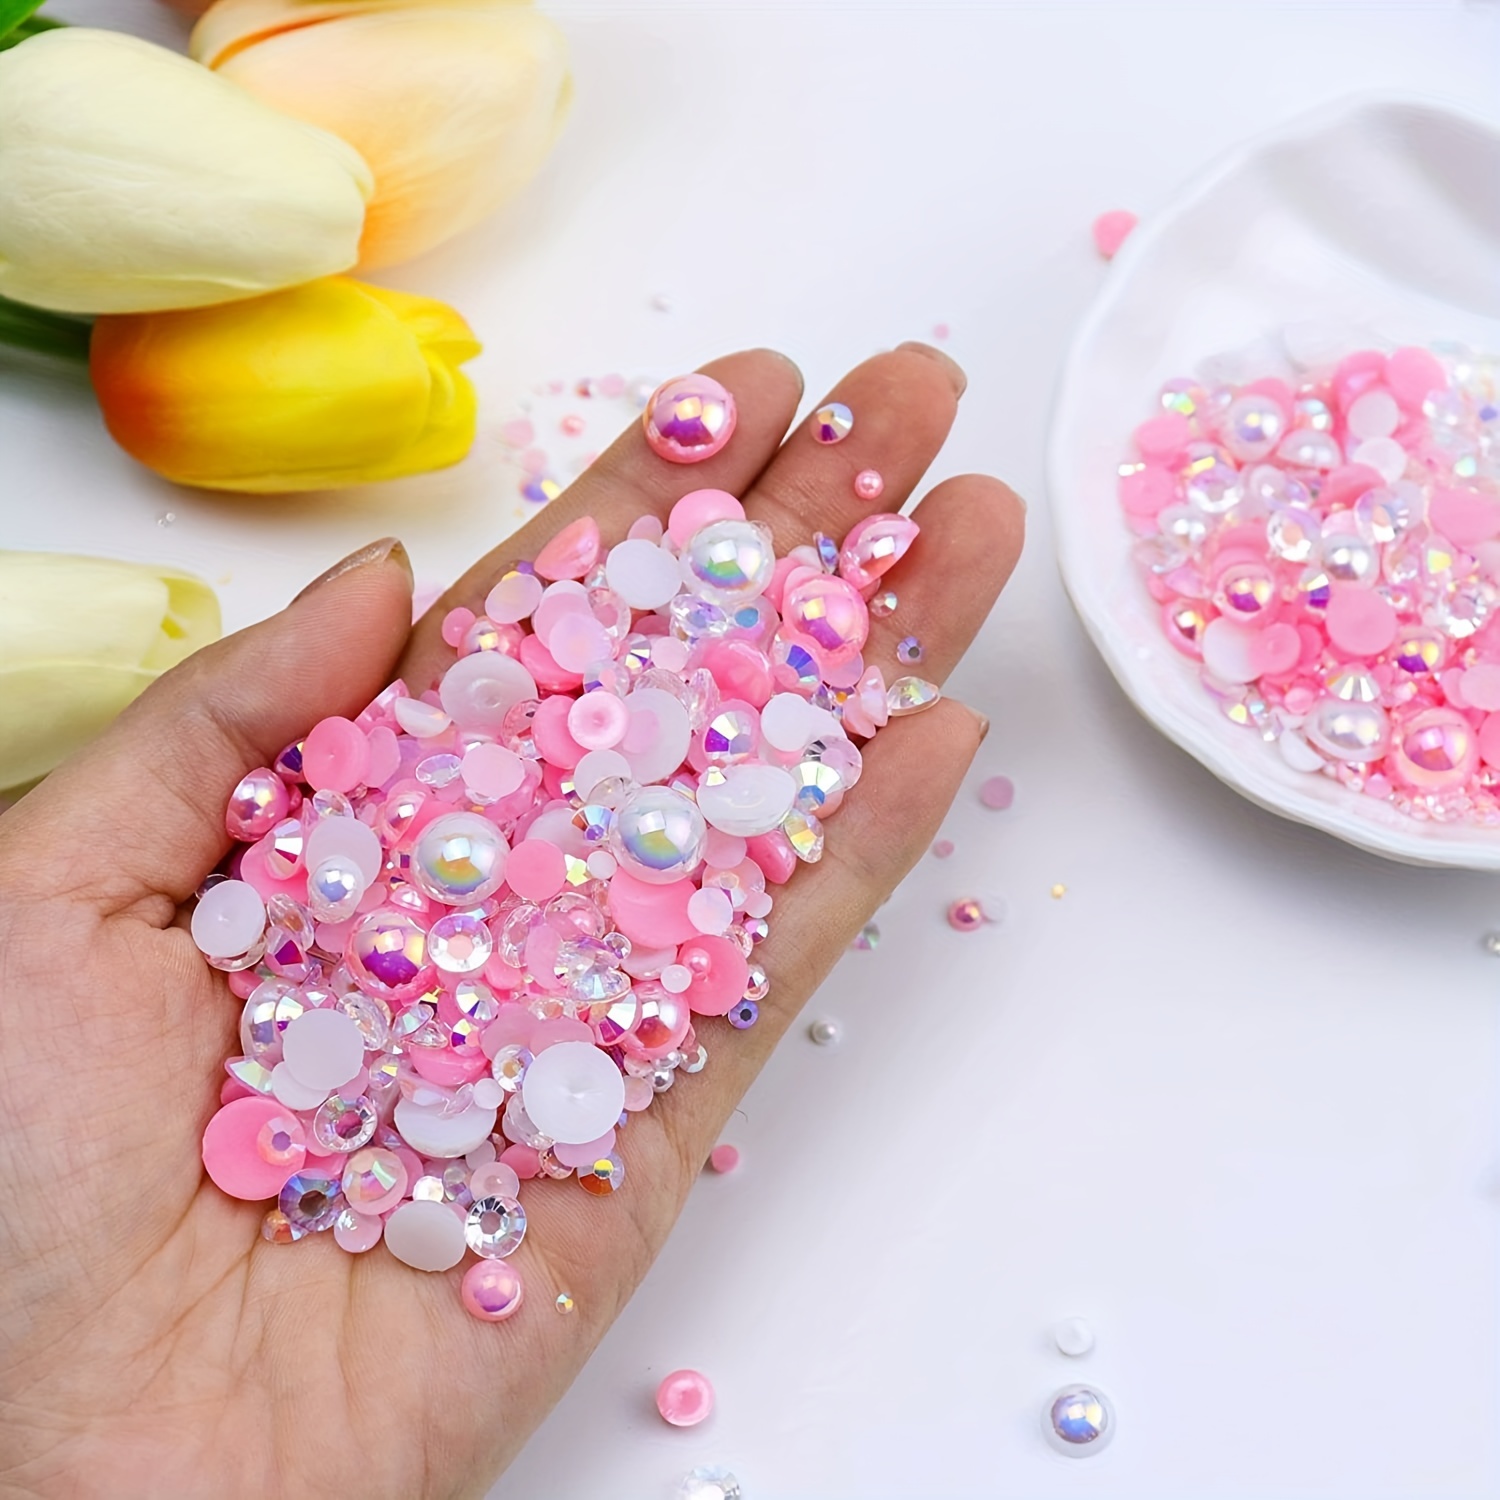 1100pcs Flatback Pearls & Rhinestones, 30g Mixed Size 3mm-10mm Ab Color  Resin Rhinestones In Pink, Blue, And White, Half Round Flatback Pearl  Rhinestones, Suitable For Nail Art, Face Art, Crafts, Jewelry Making